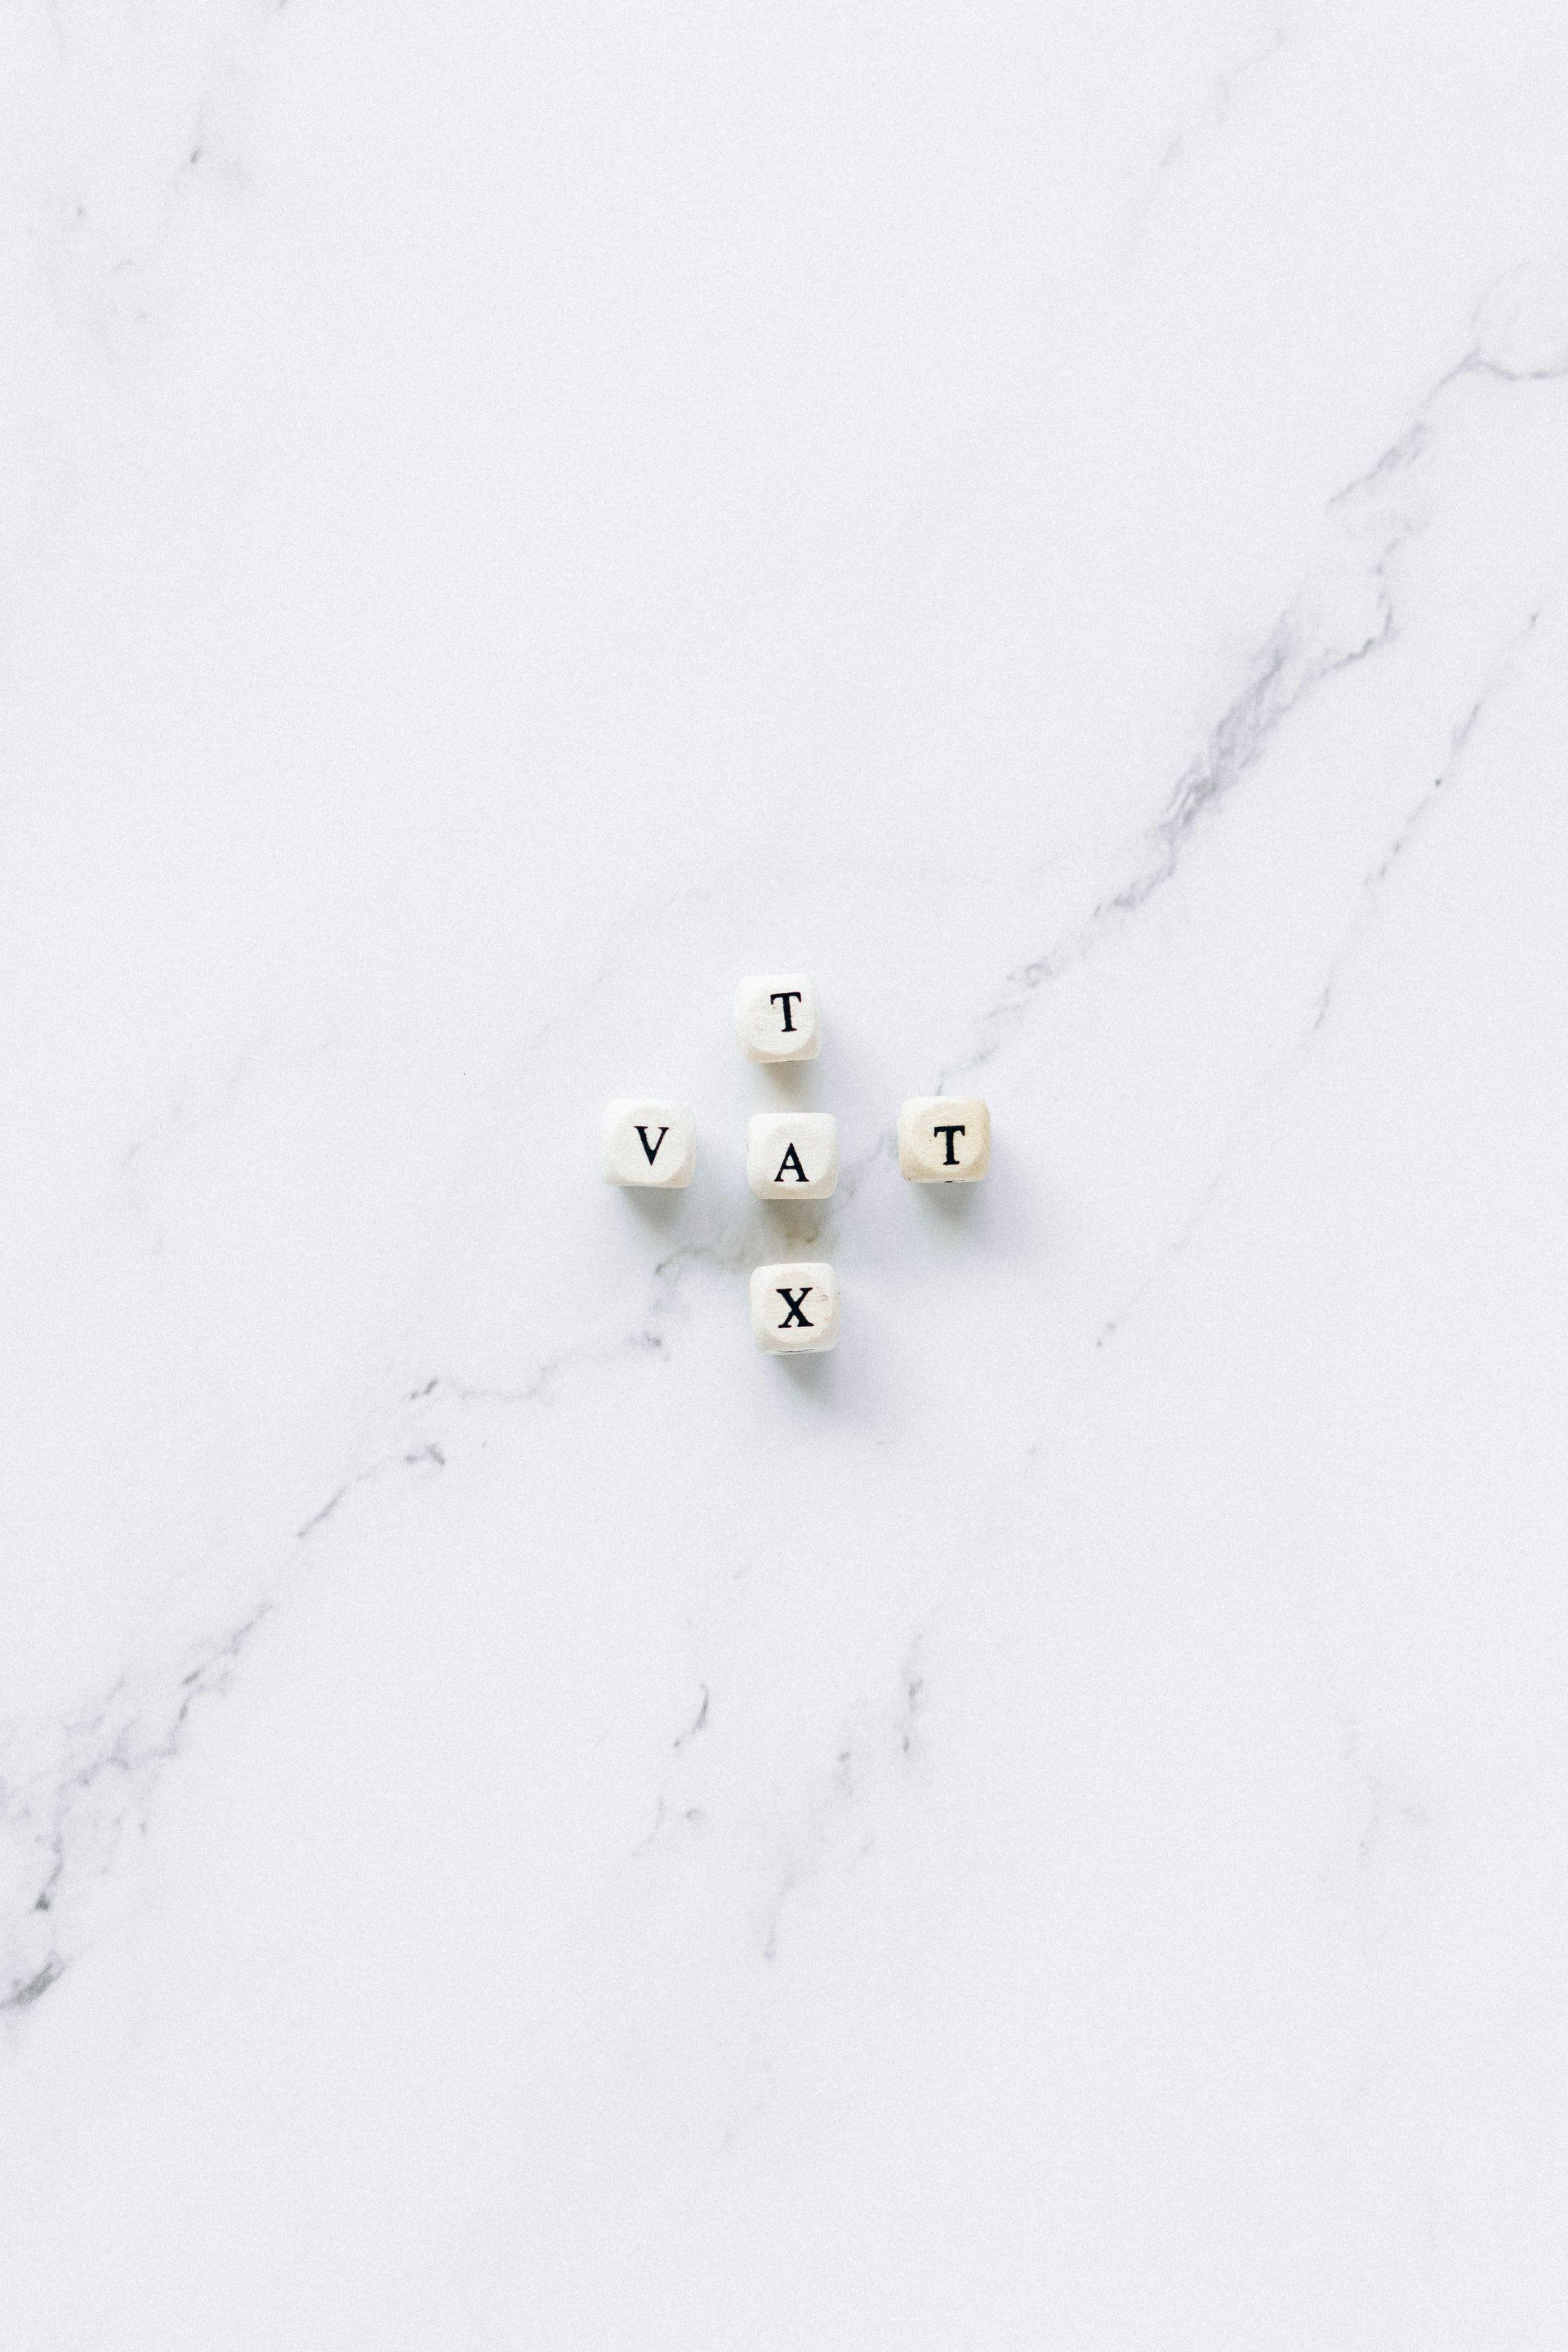 5 dice in a cross spelling VAT left to right and TAX top to bottom